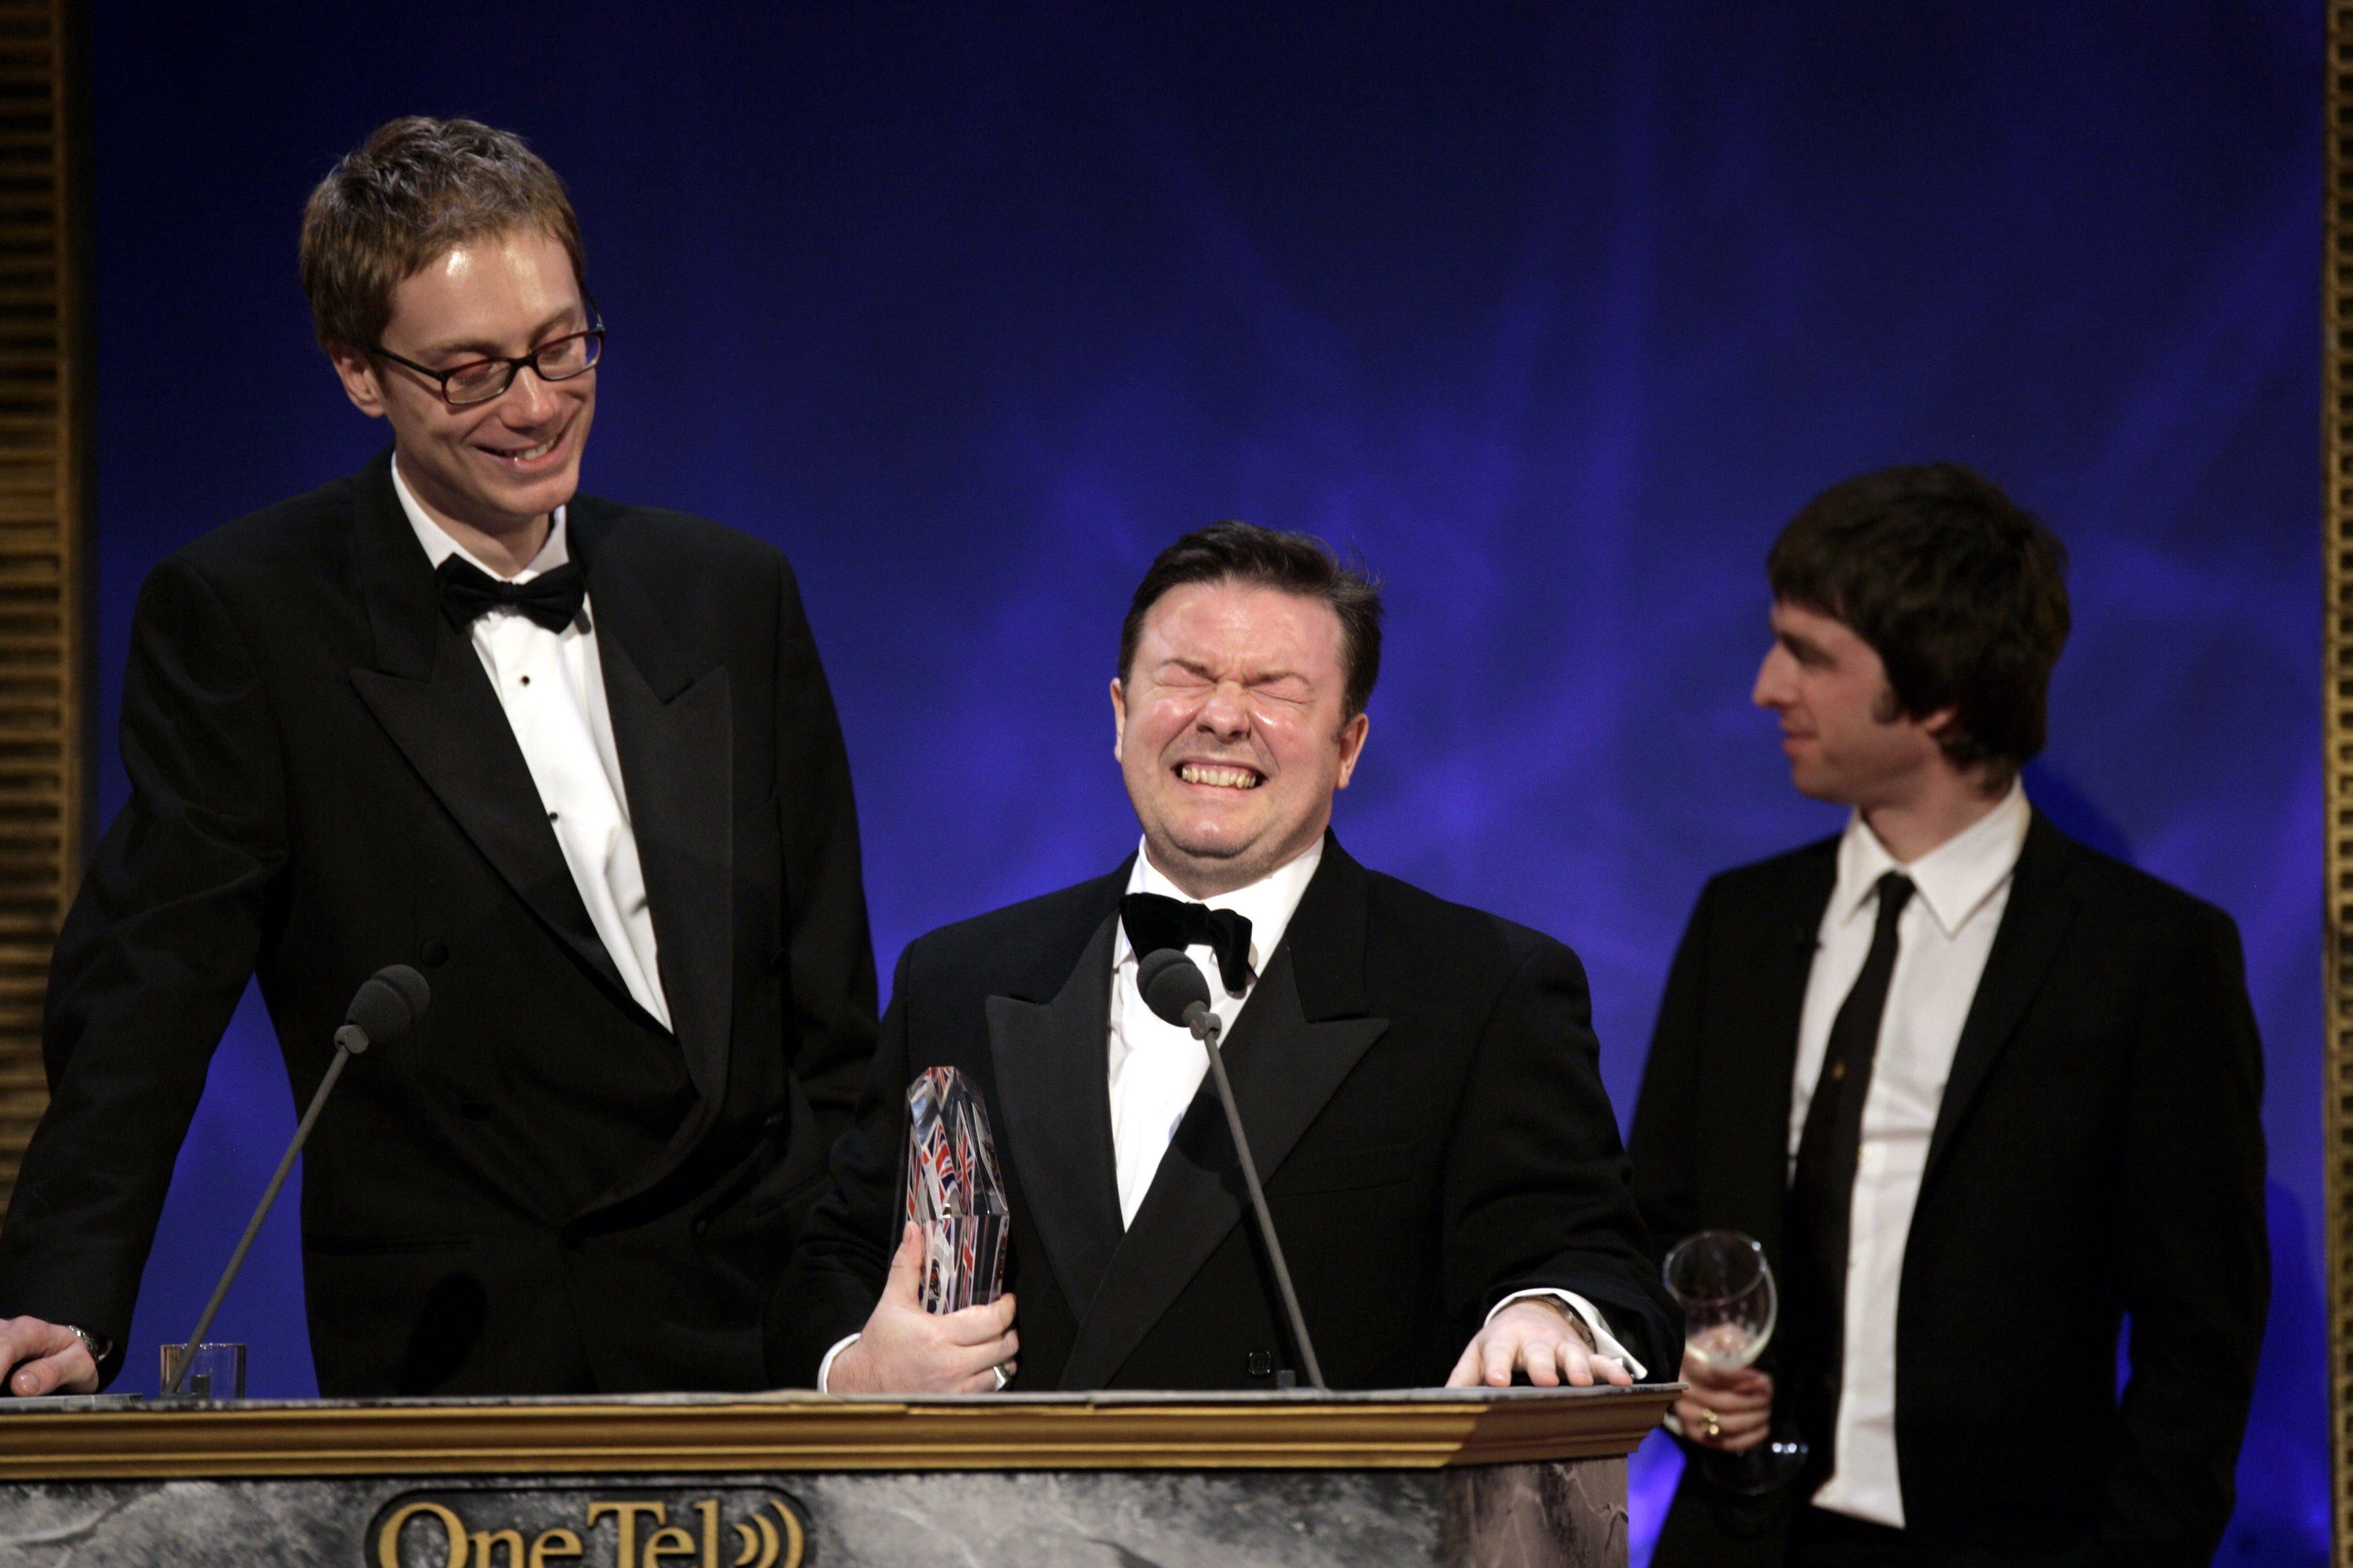 Stephen Merchant, Ricky Gervais and Noel Gallagher at the British Comedy Awards in London in 2004